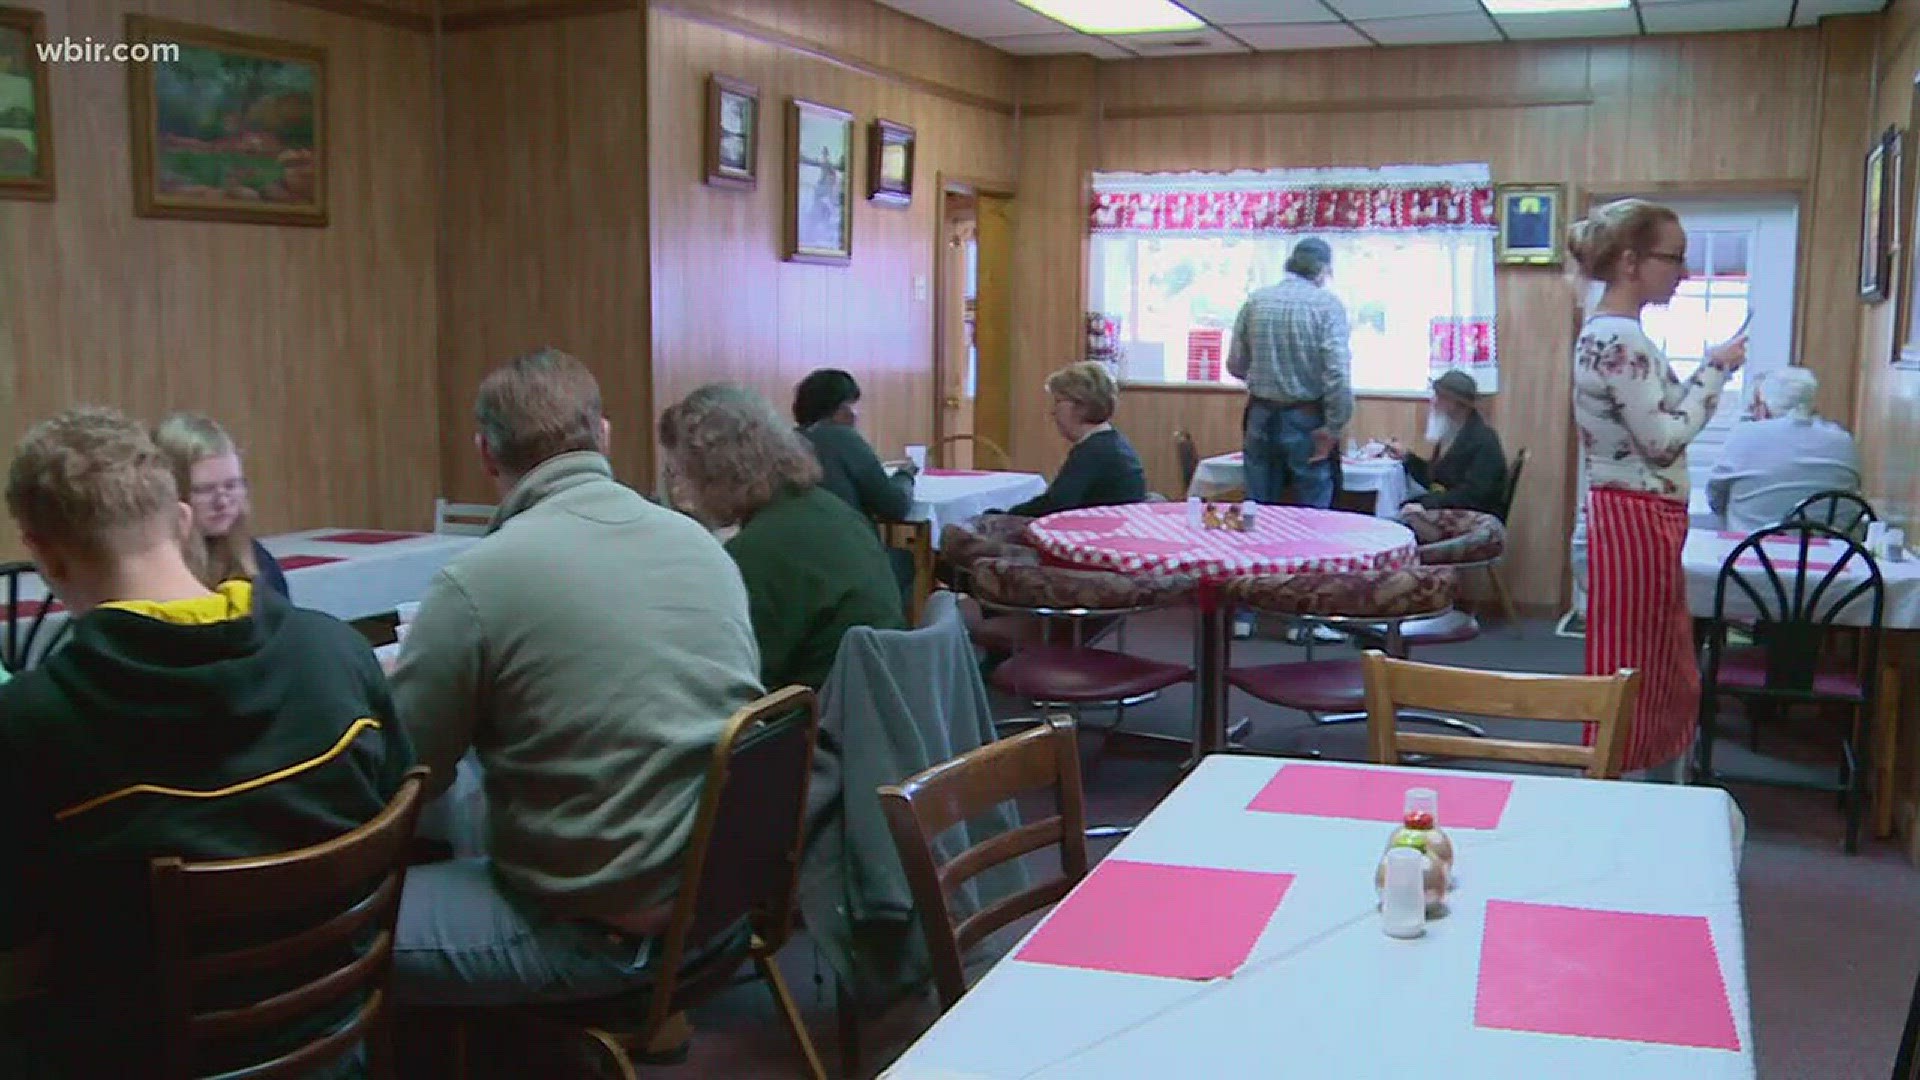 Nov. 23, 2017: A restaurant in Oliver Springs opened its doors to anyone who wanted a free Thanksgiving meal.